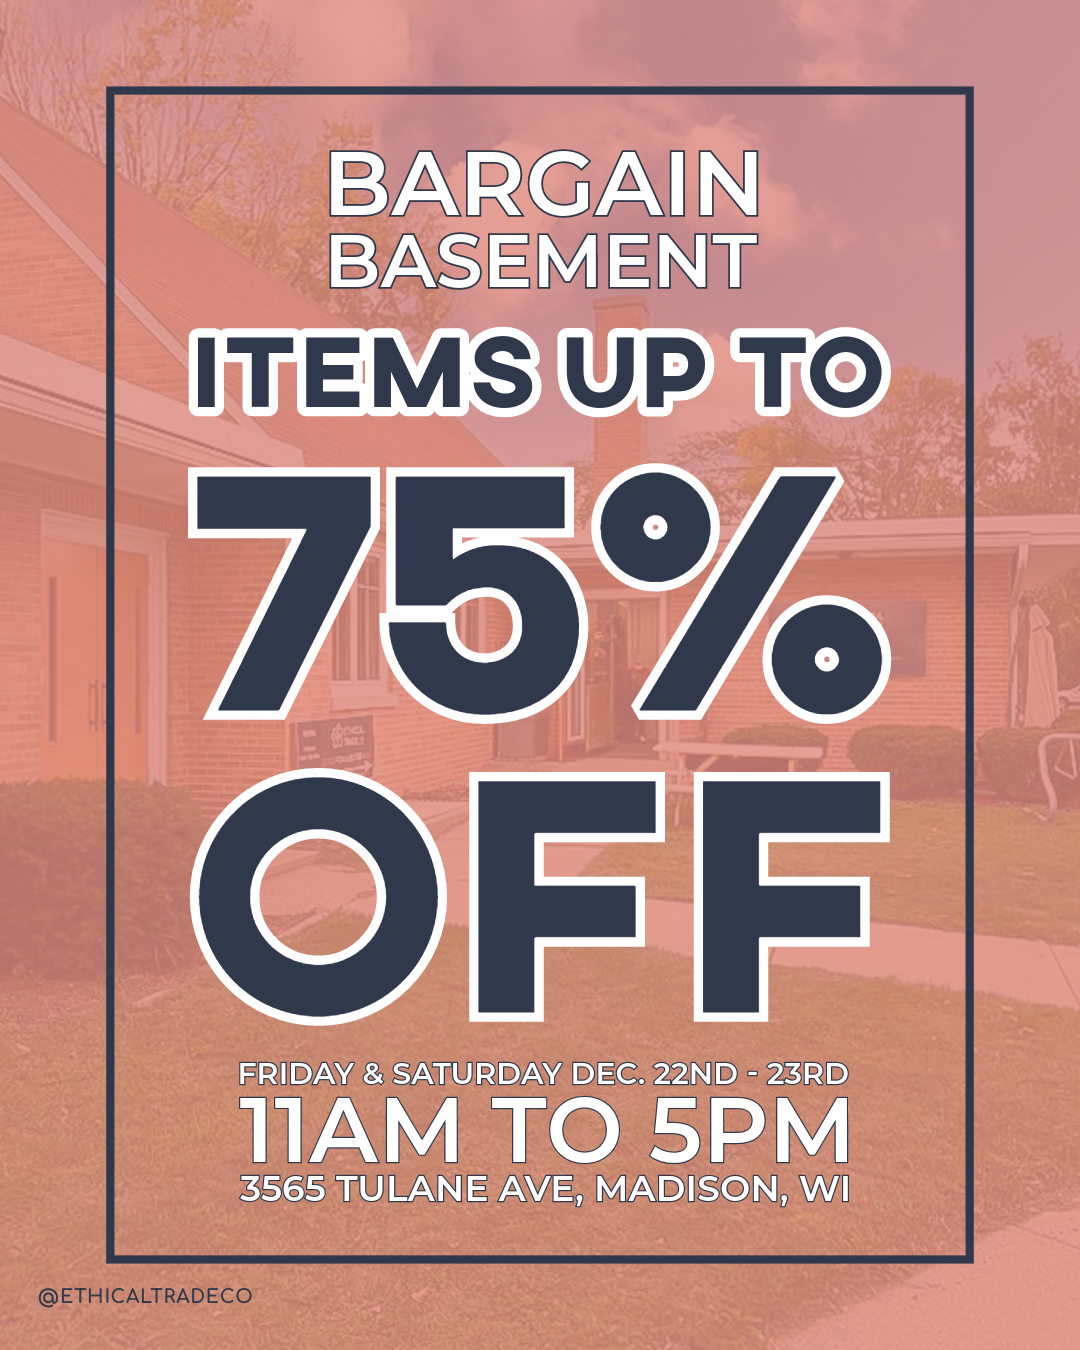 Ethical Trade Co's Annual Bargain Basement